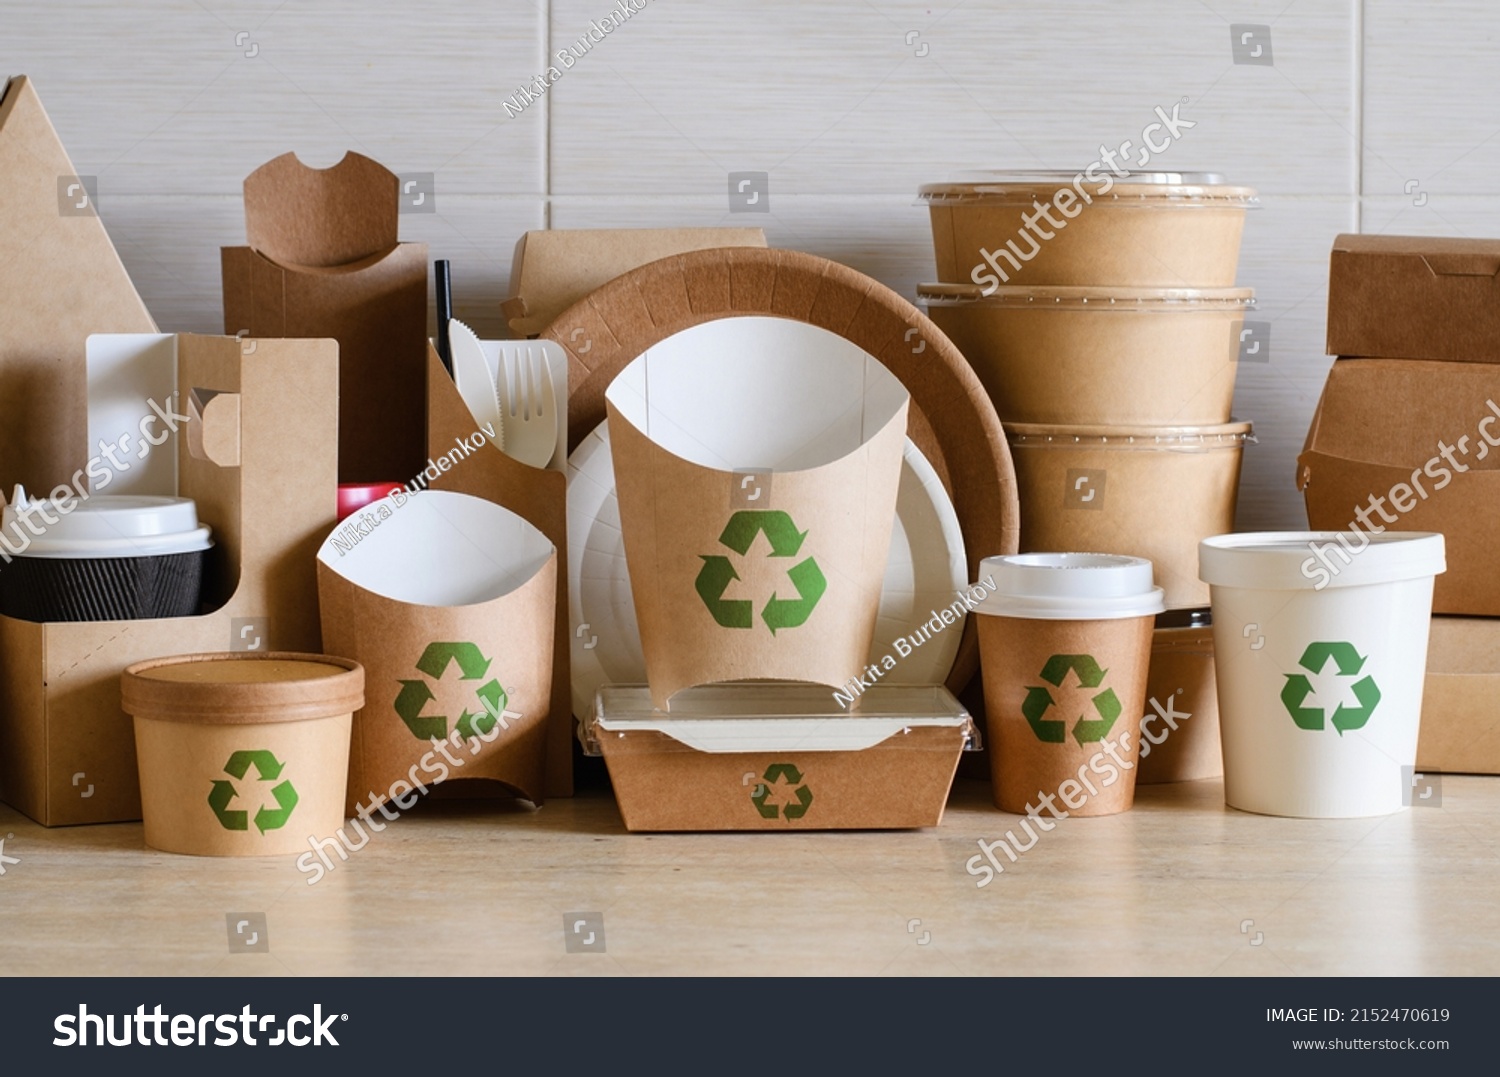 The concept of zero waste and recycling. Use of eco-friendly paper tableware and packaging made from biodegradable materials. #2152470619